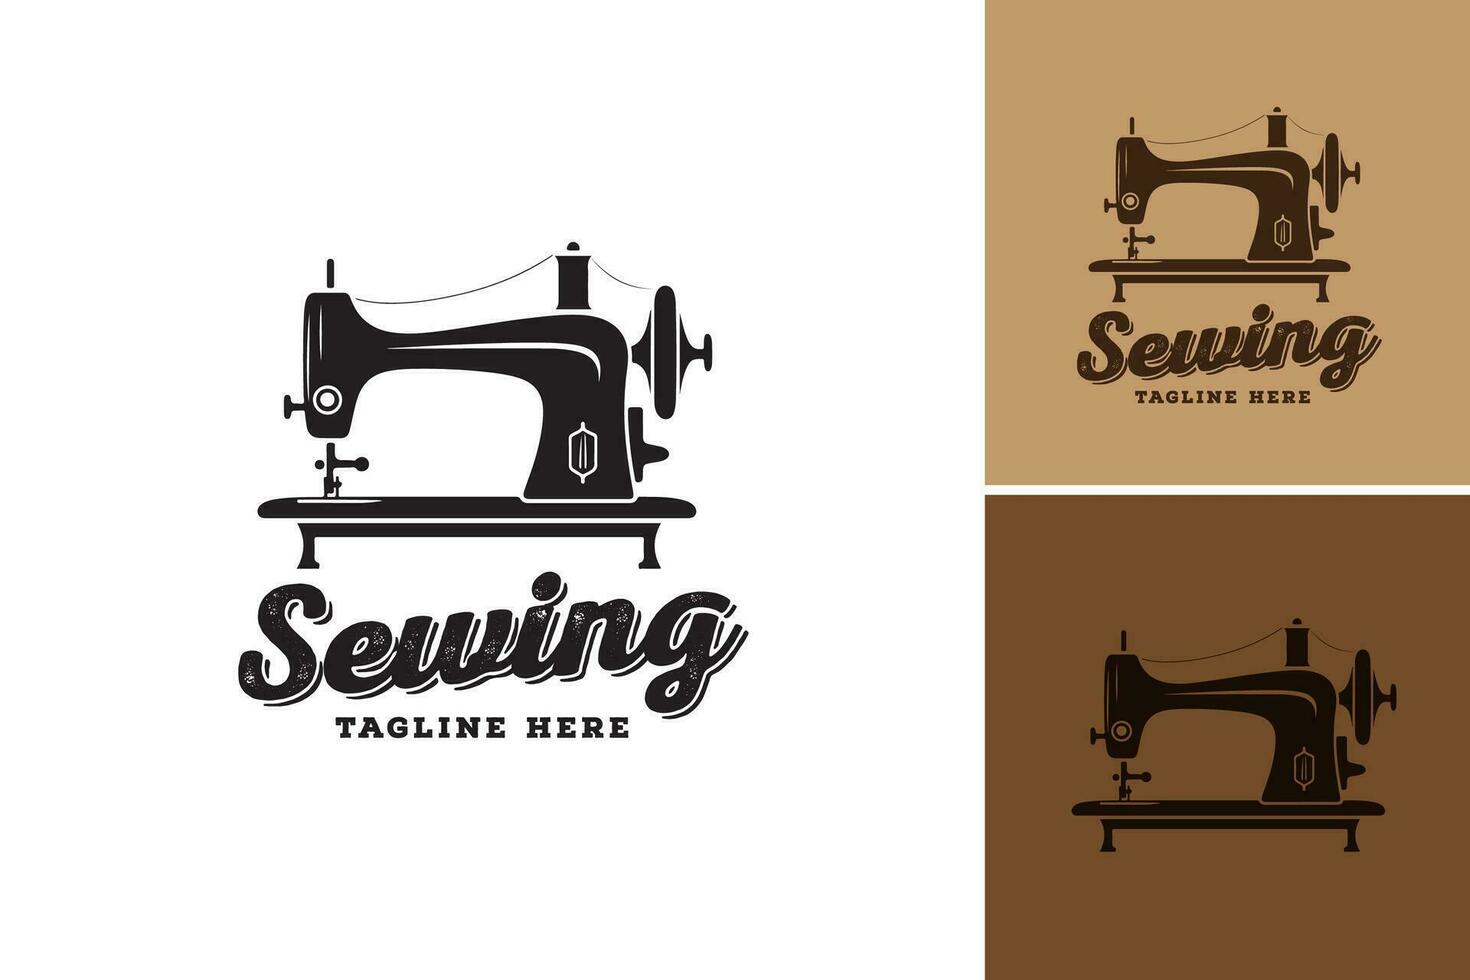 sewing machine logo design. It is a suitable asset for creating logos related to sewing, tailoring, fashion, or any business related to the textile industry. vector